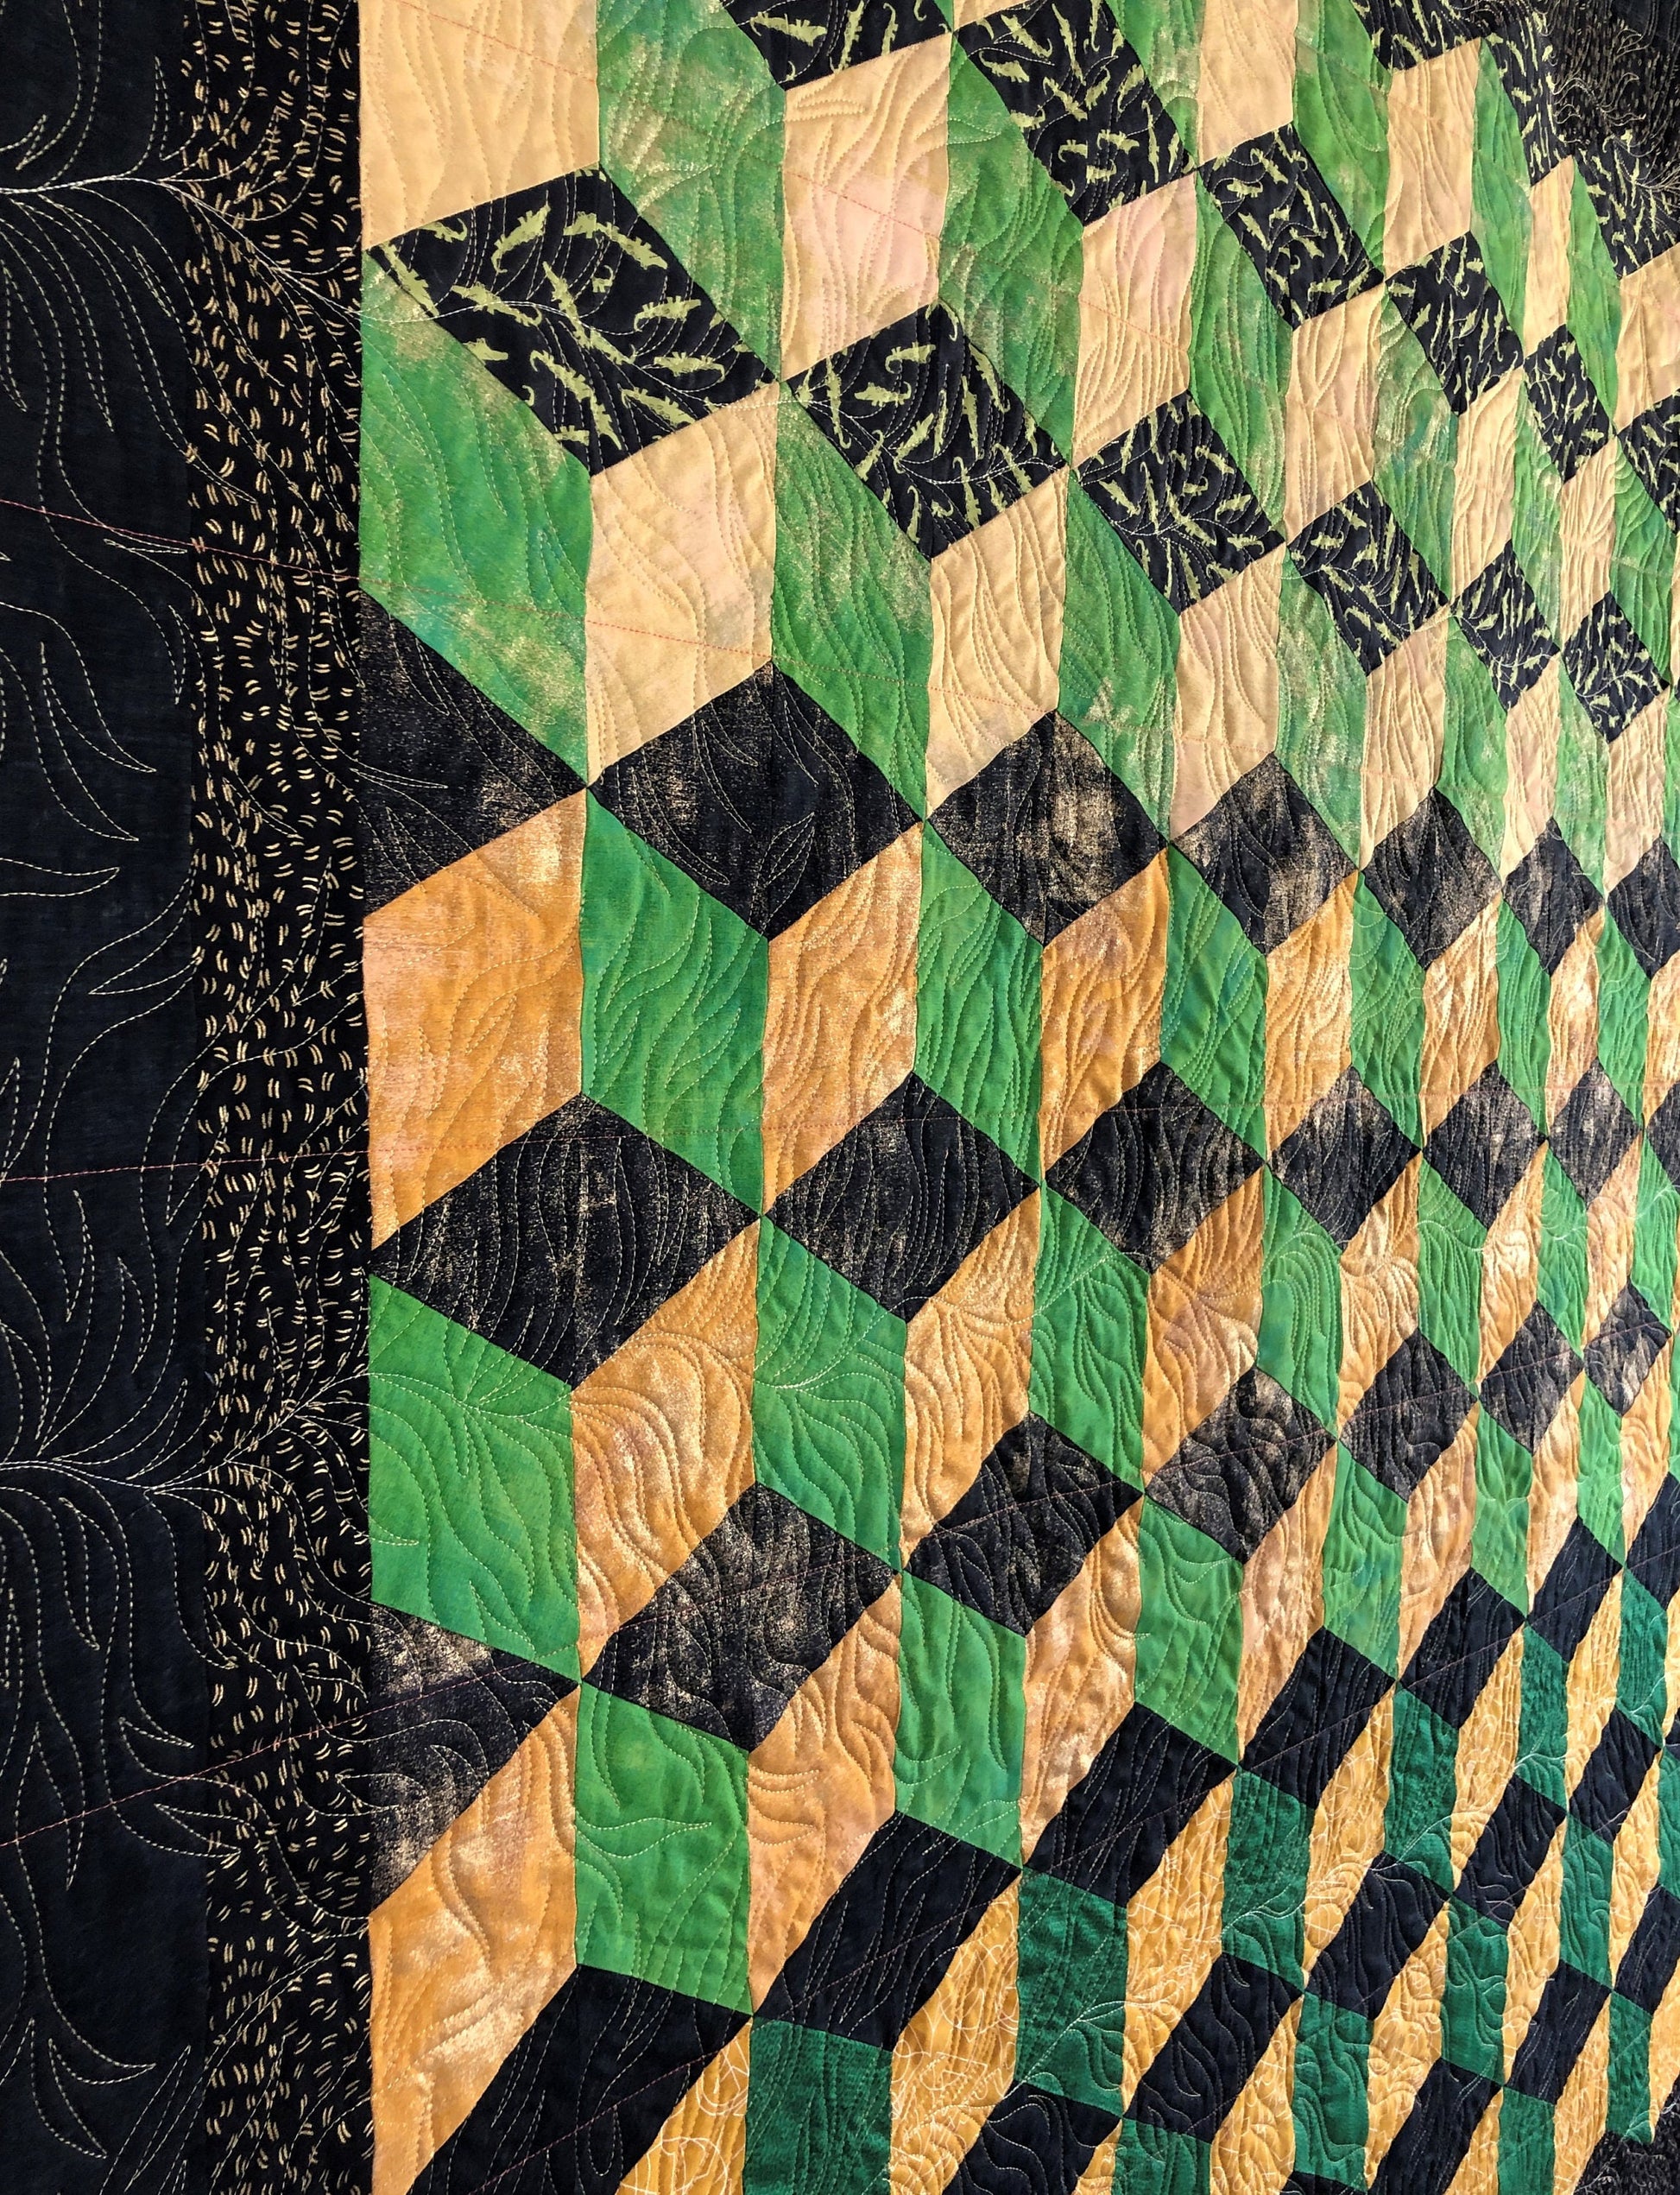 Loki Quilt, Cube Optical Illusion, Green, Black, and Gold, Throw Size